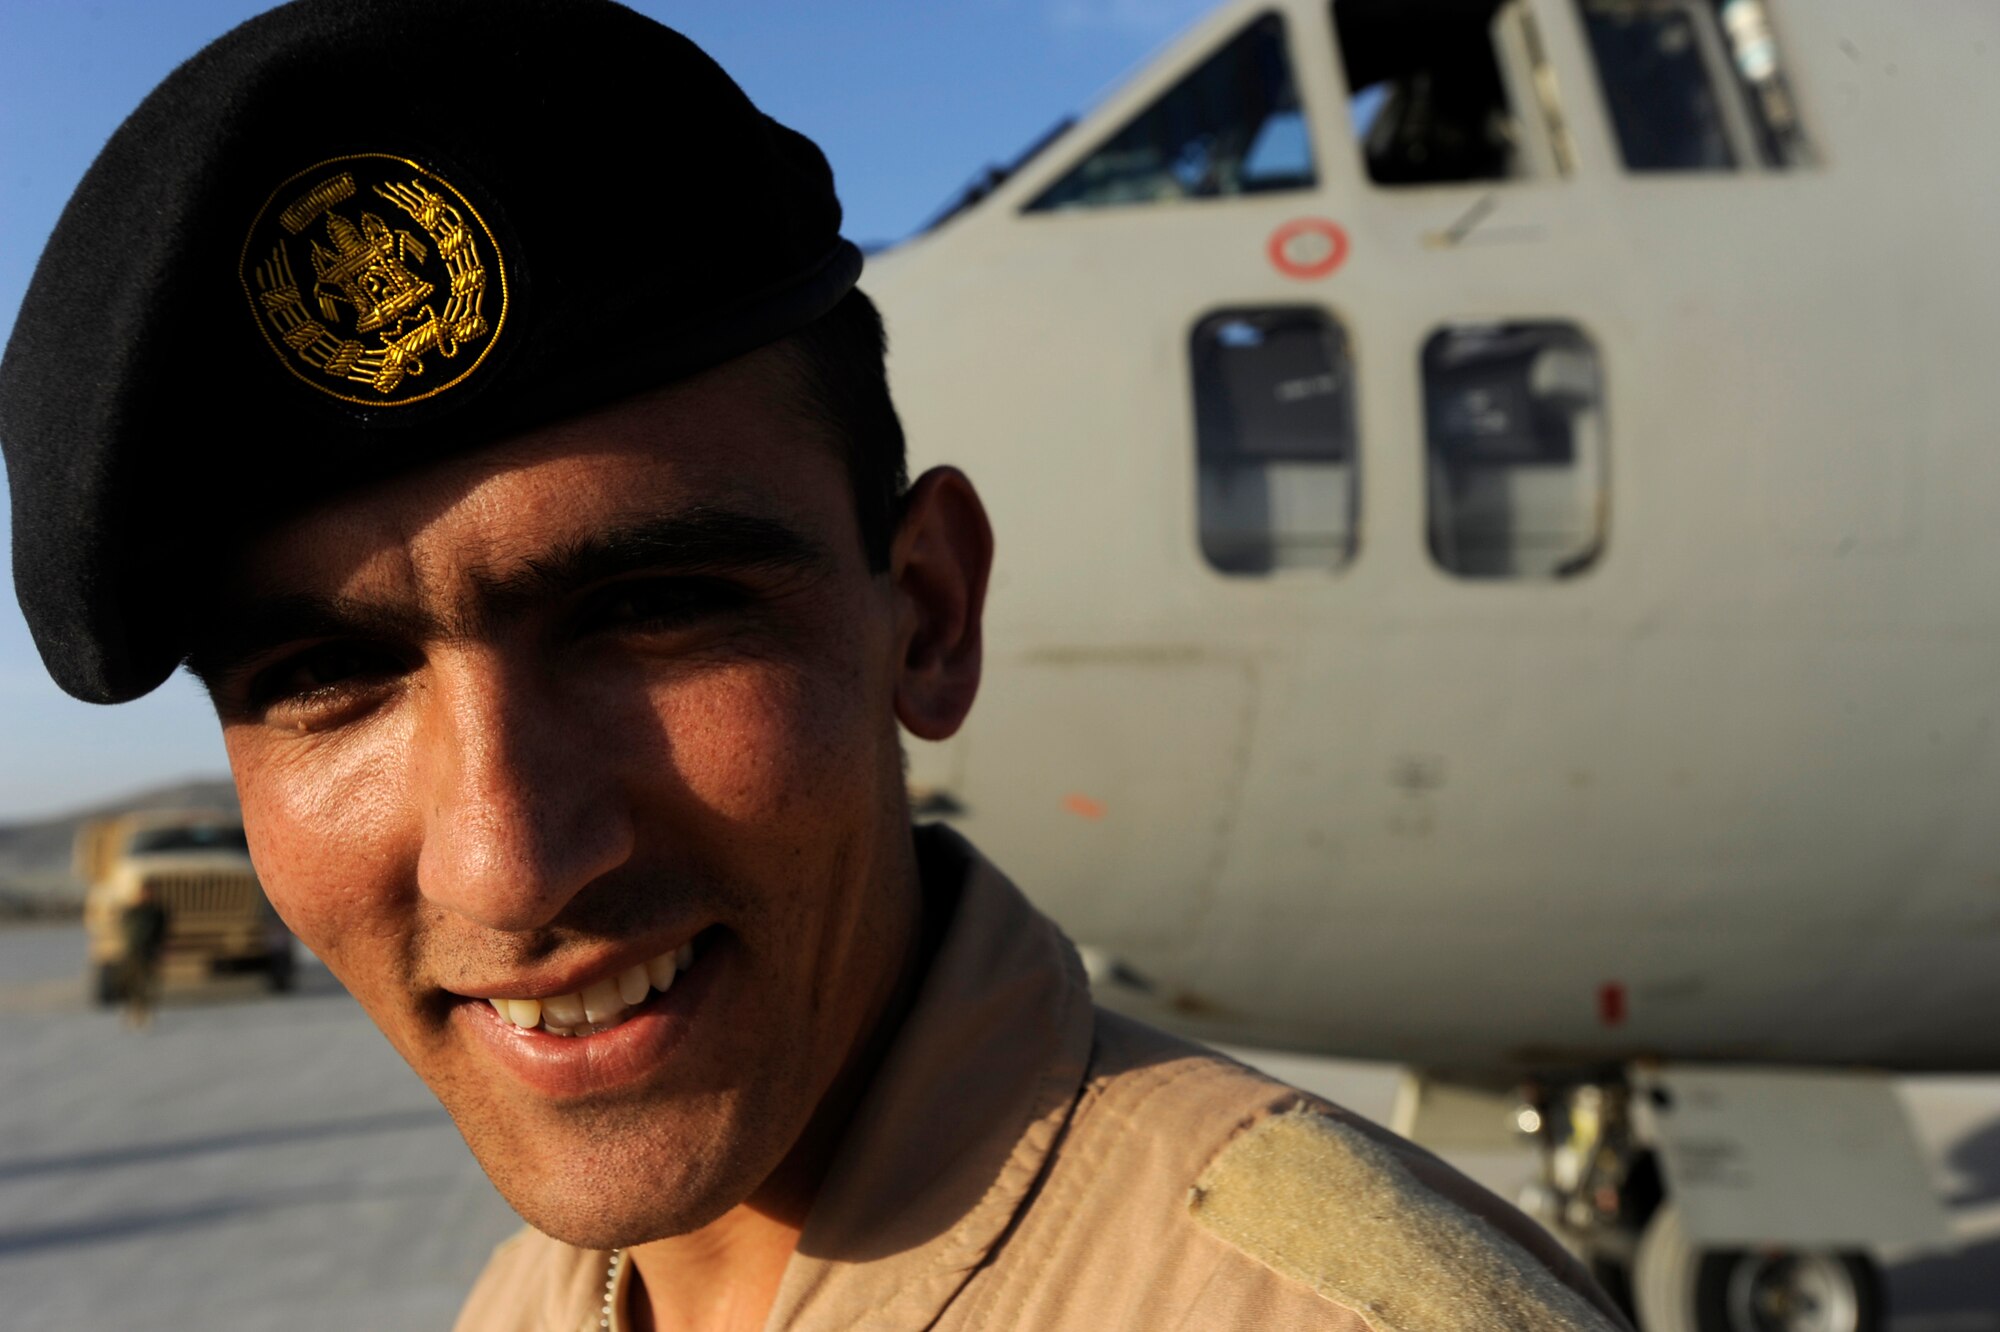 First Lieutenant Faiz M. Ramaki, a Afghanistan National Army Air Corps (ANAAC) C-27 pilot, smiles for a photo after flying a successful first operational mission,  March 24, 2010, at Kabul  International Airport, Afghanistan. "This mission shows the ability of our instructors, show the ability of us as Afghans and shows you what hard work can do," said Lieutenant Ramaki, who is also the first Afghan pilot to graduate from the nine-month U.S. pilot training course in more than 50 years. "We can now assist our brothers in combat and that means a lot. We are flying missions with meaning and purpose and I could not be happier."  (U.S. Air Force photo/Staff Sgt. Manuel J. Martinez/released)

